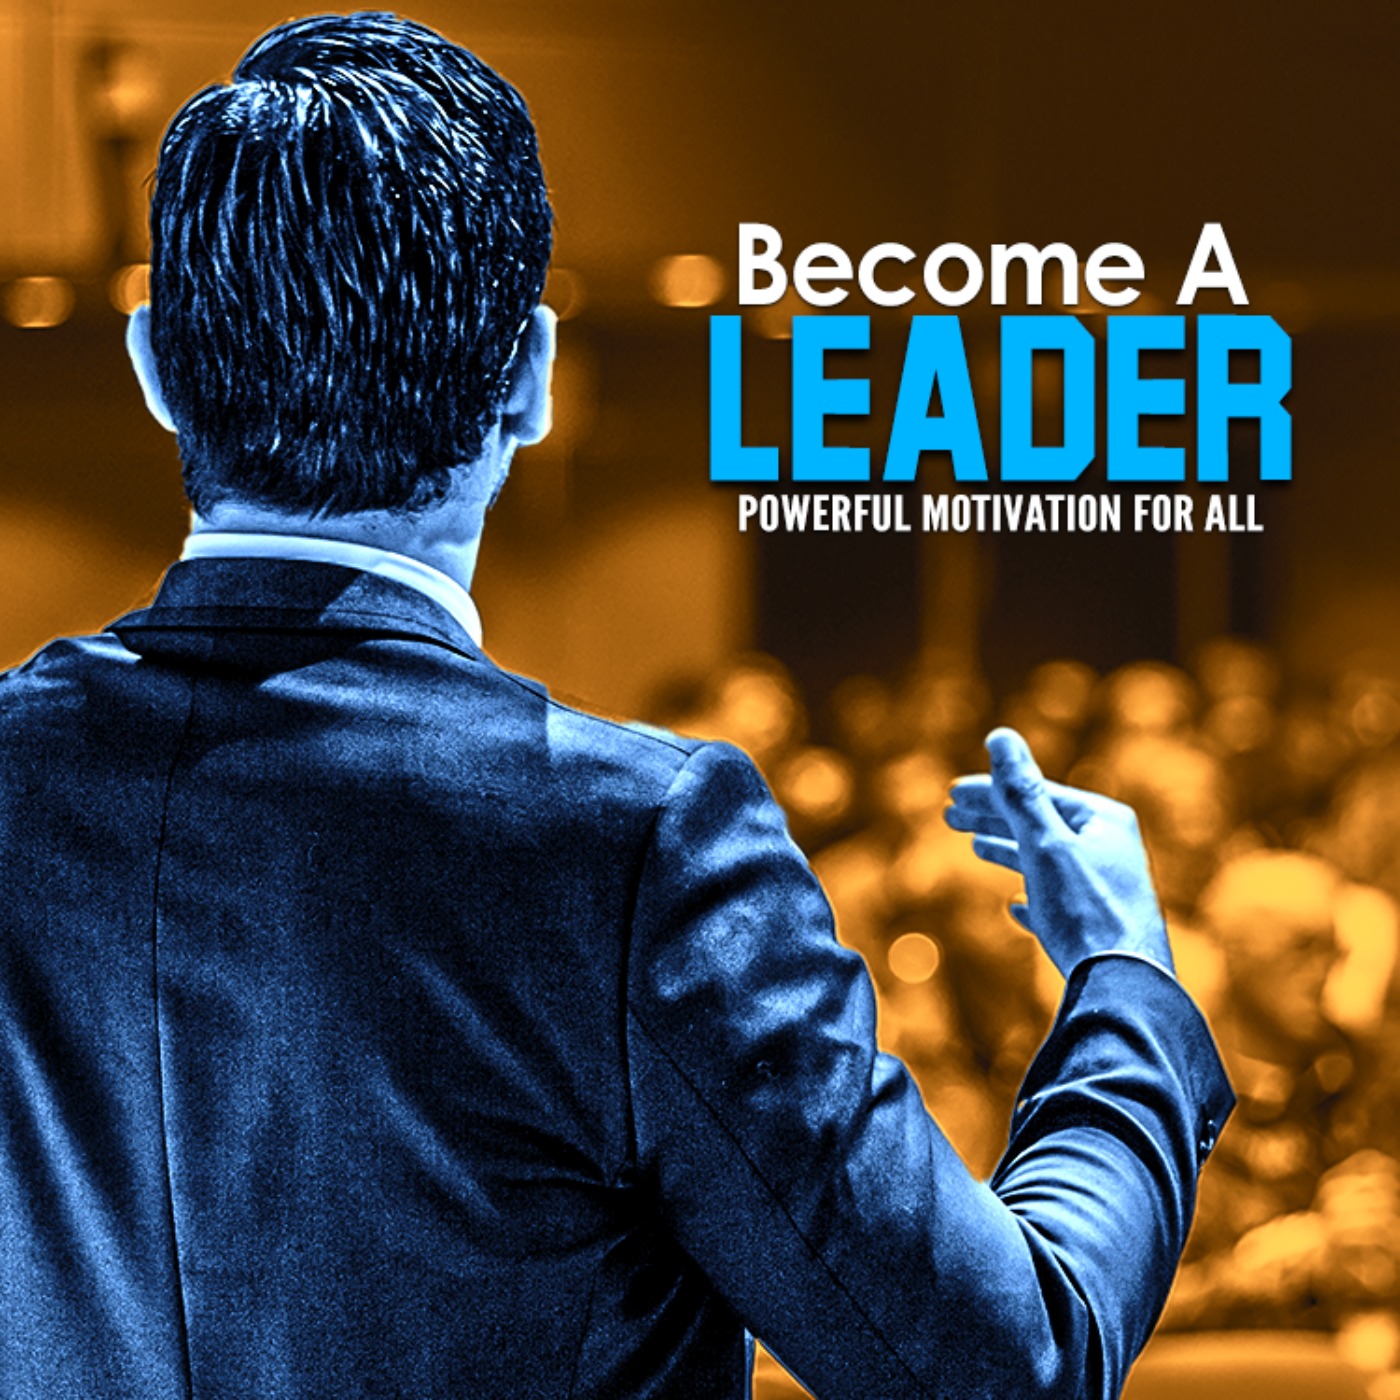 BECOME THE LEADER OF YOUR DREAMS